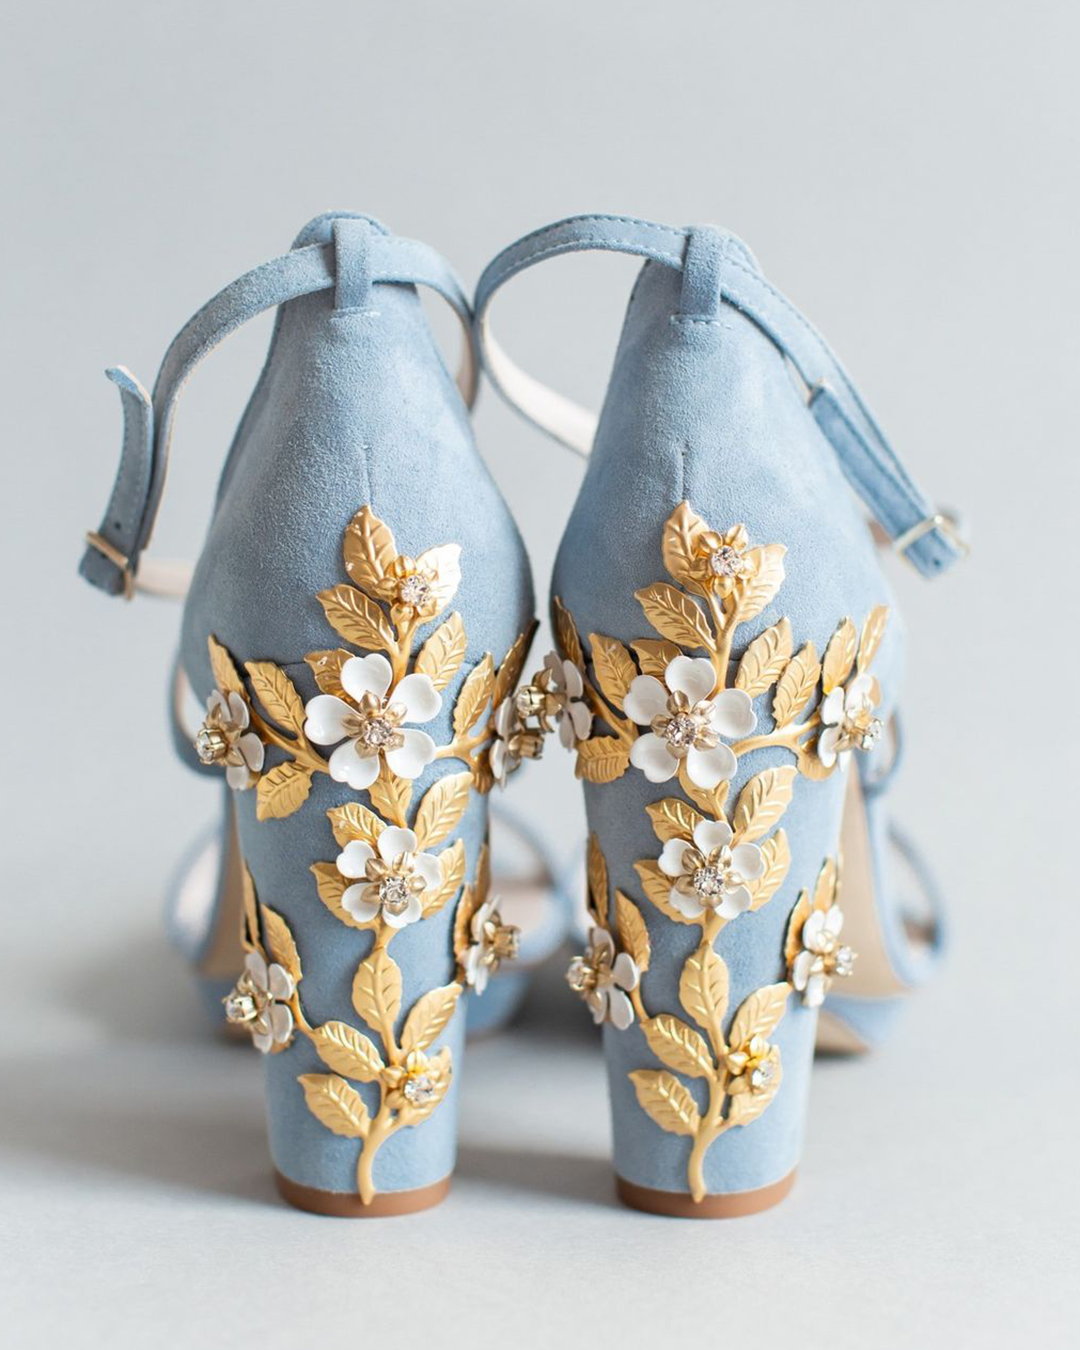 designer wedding shoes blue with gold floral harrietwildeshoes